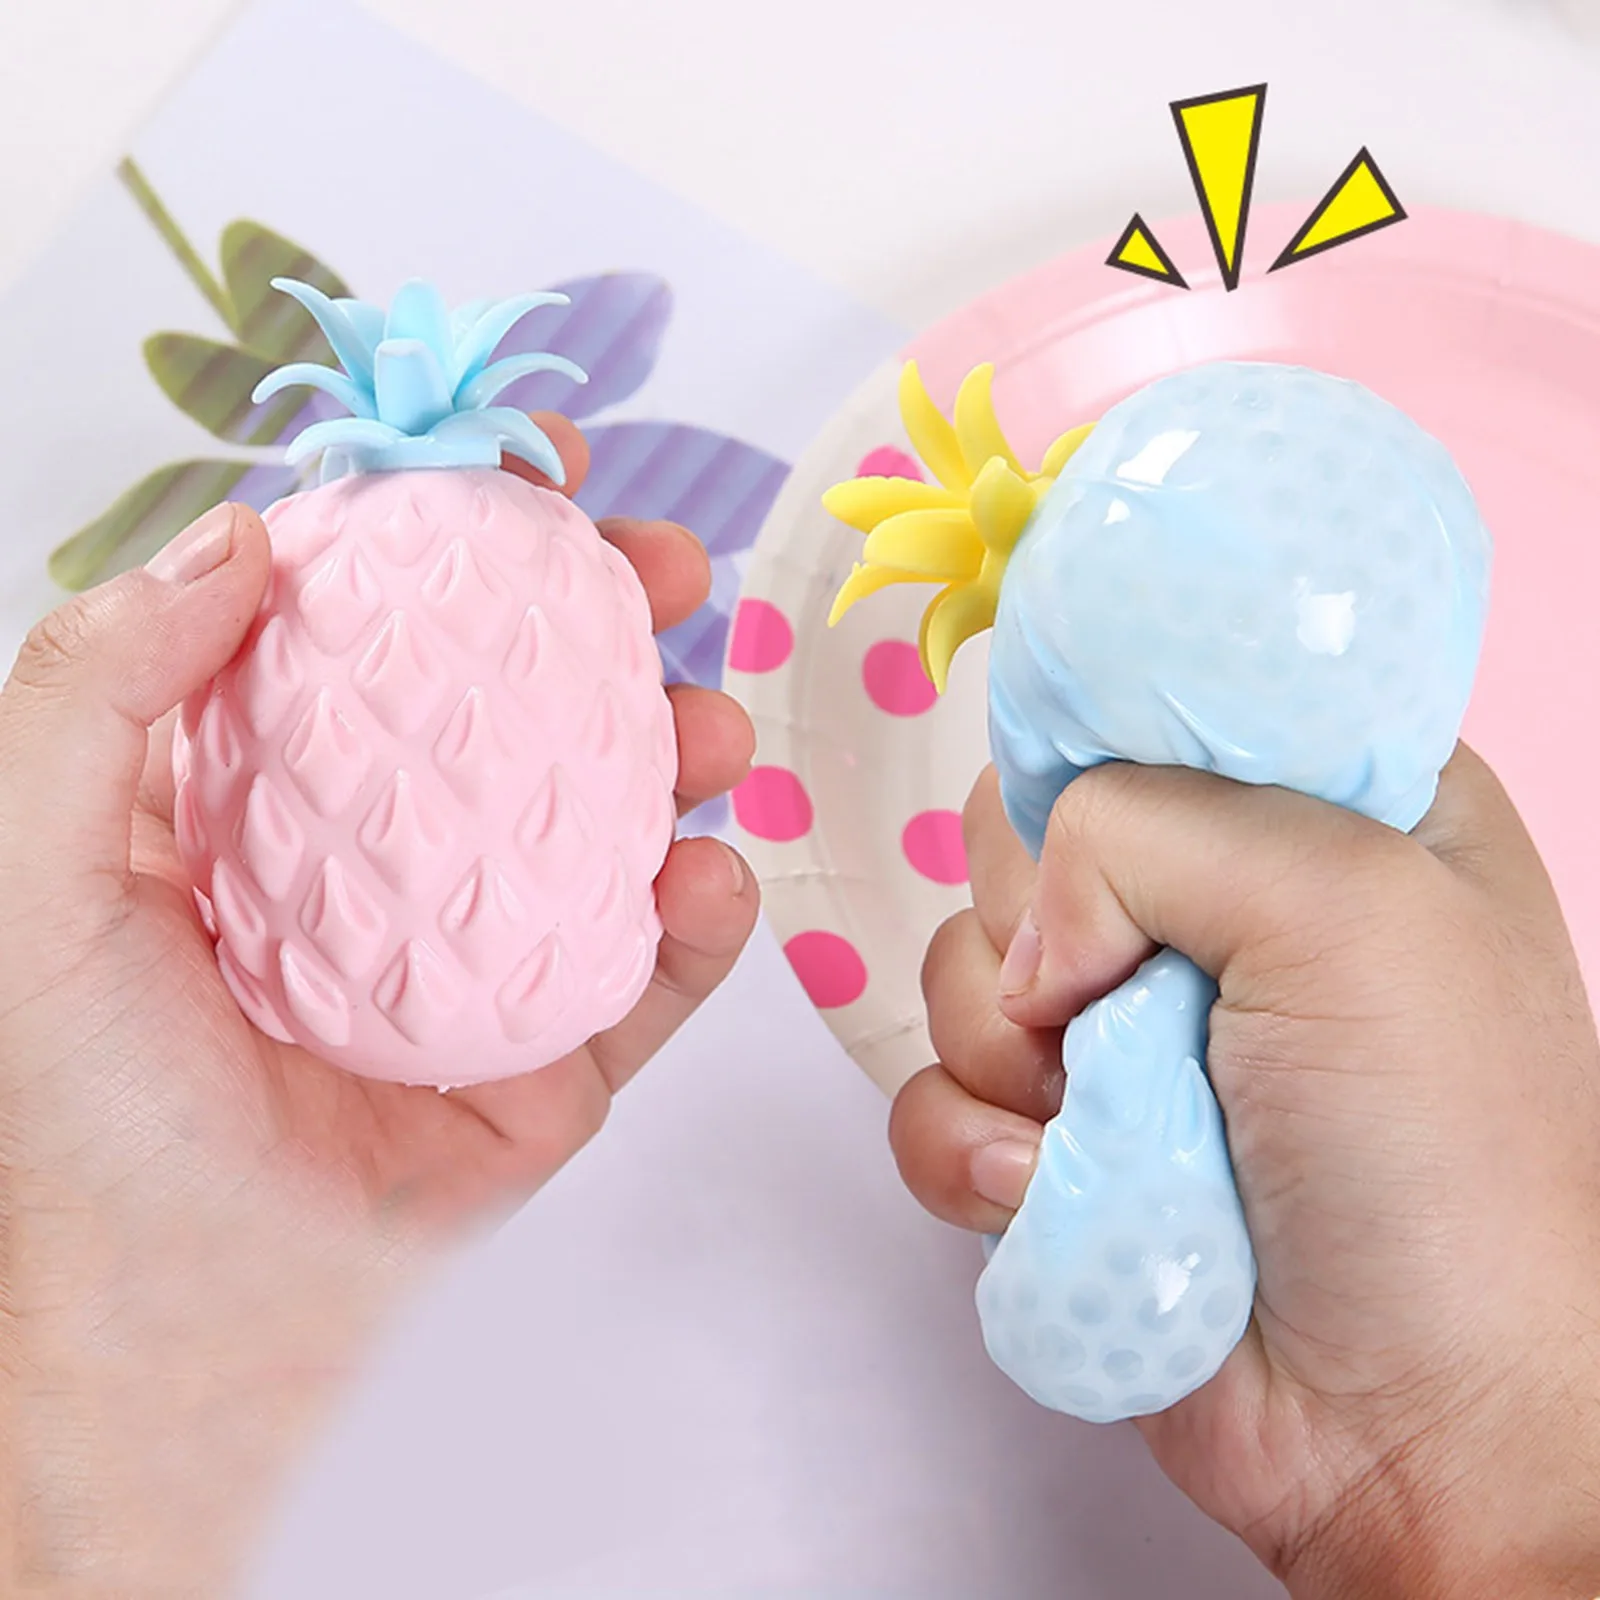 

Fun Soft Pineapple Anti Stress Ball Stress Reliever Toy for Children Adult Fidget Squishy Antistress Creativity Sensory Toy Gift